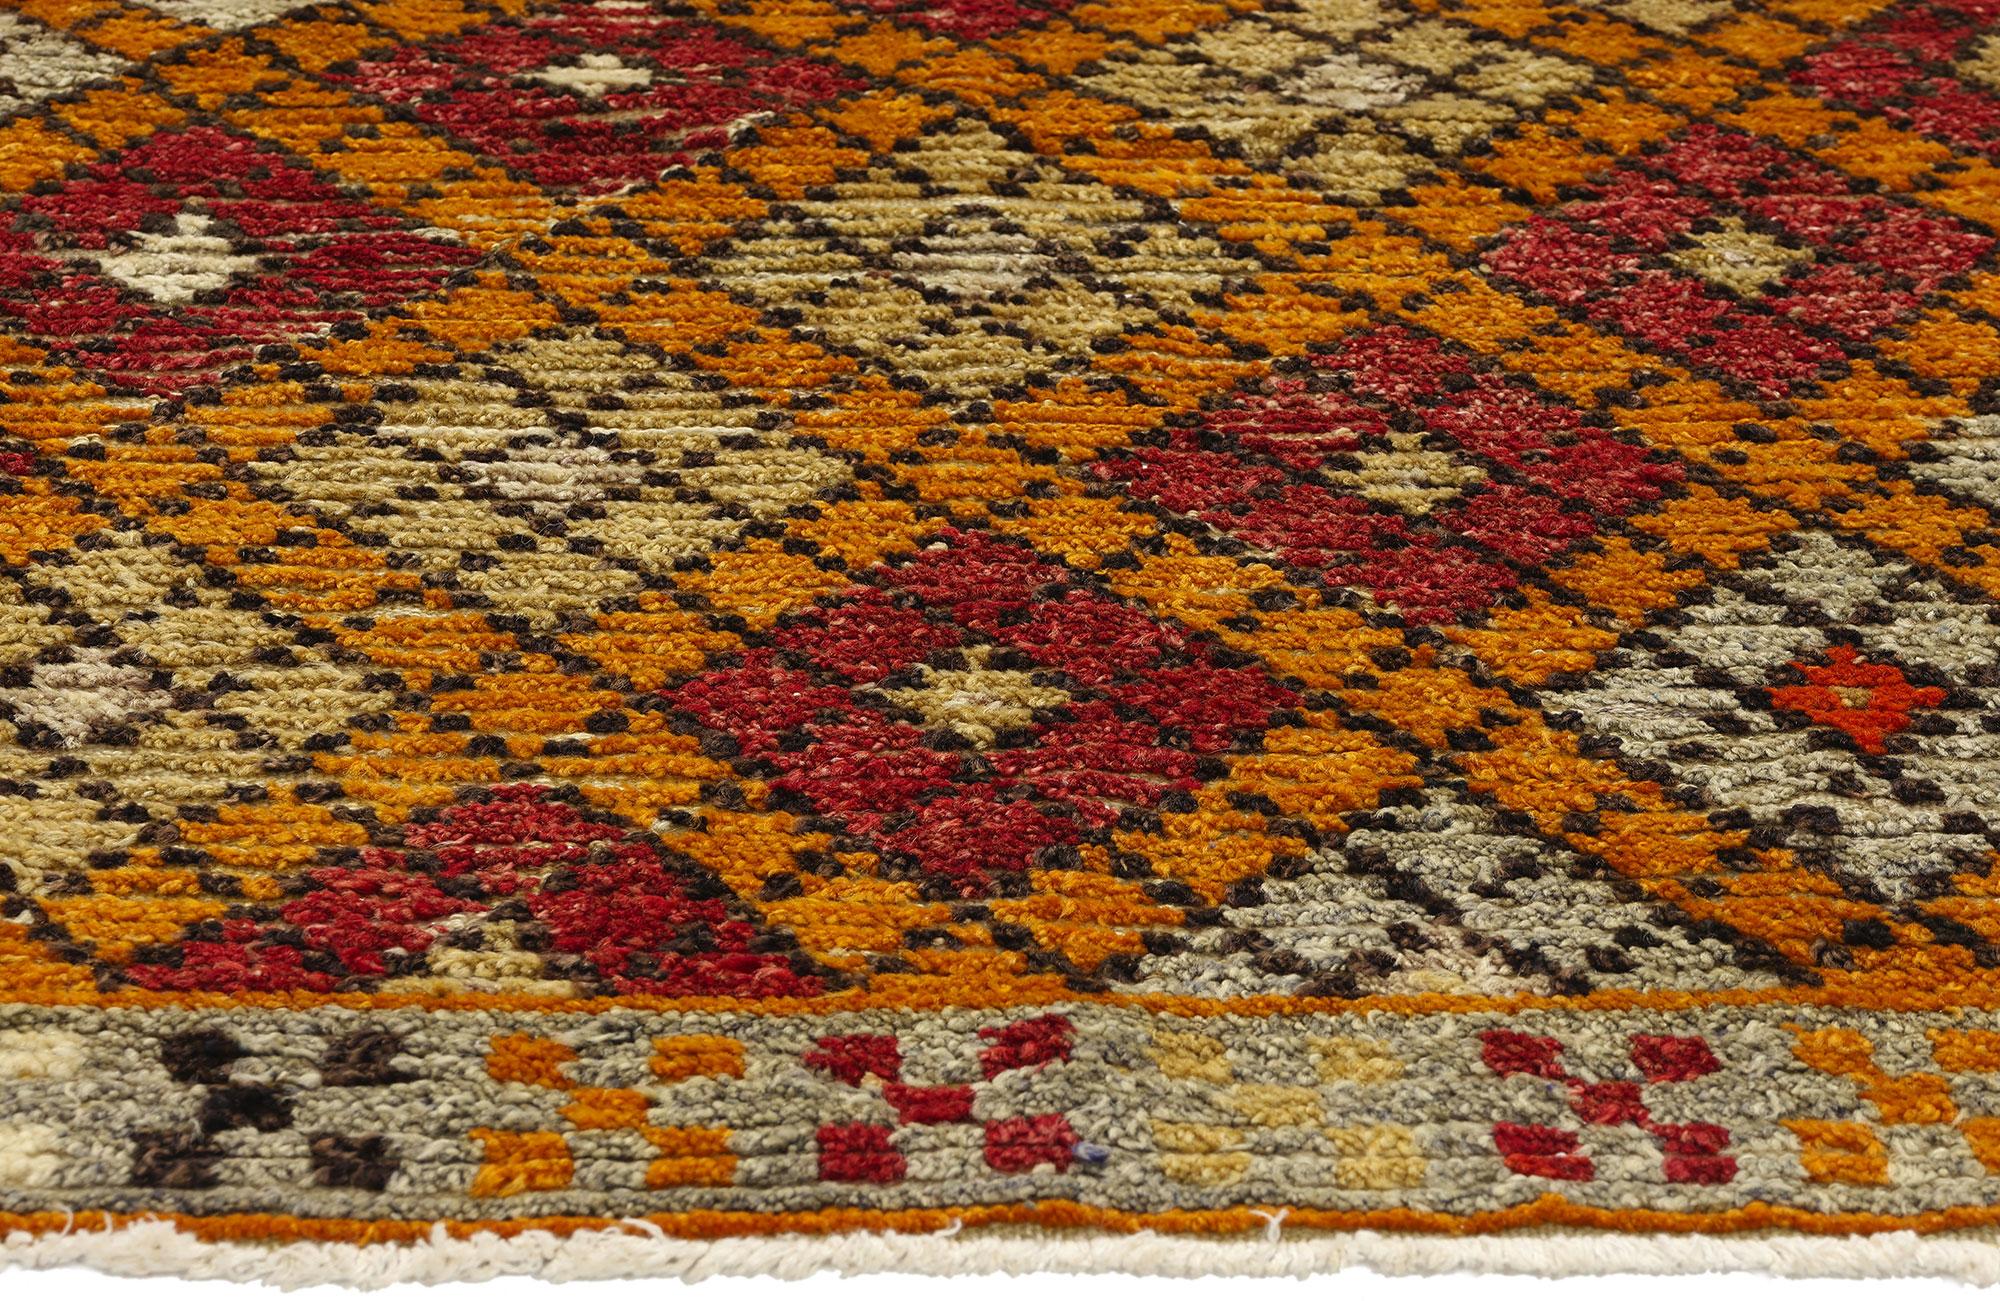 Midcentury Modern Vintage Turkish Oushak Rug  In Good Condition For Sale In Dallas, TX